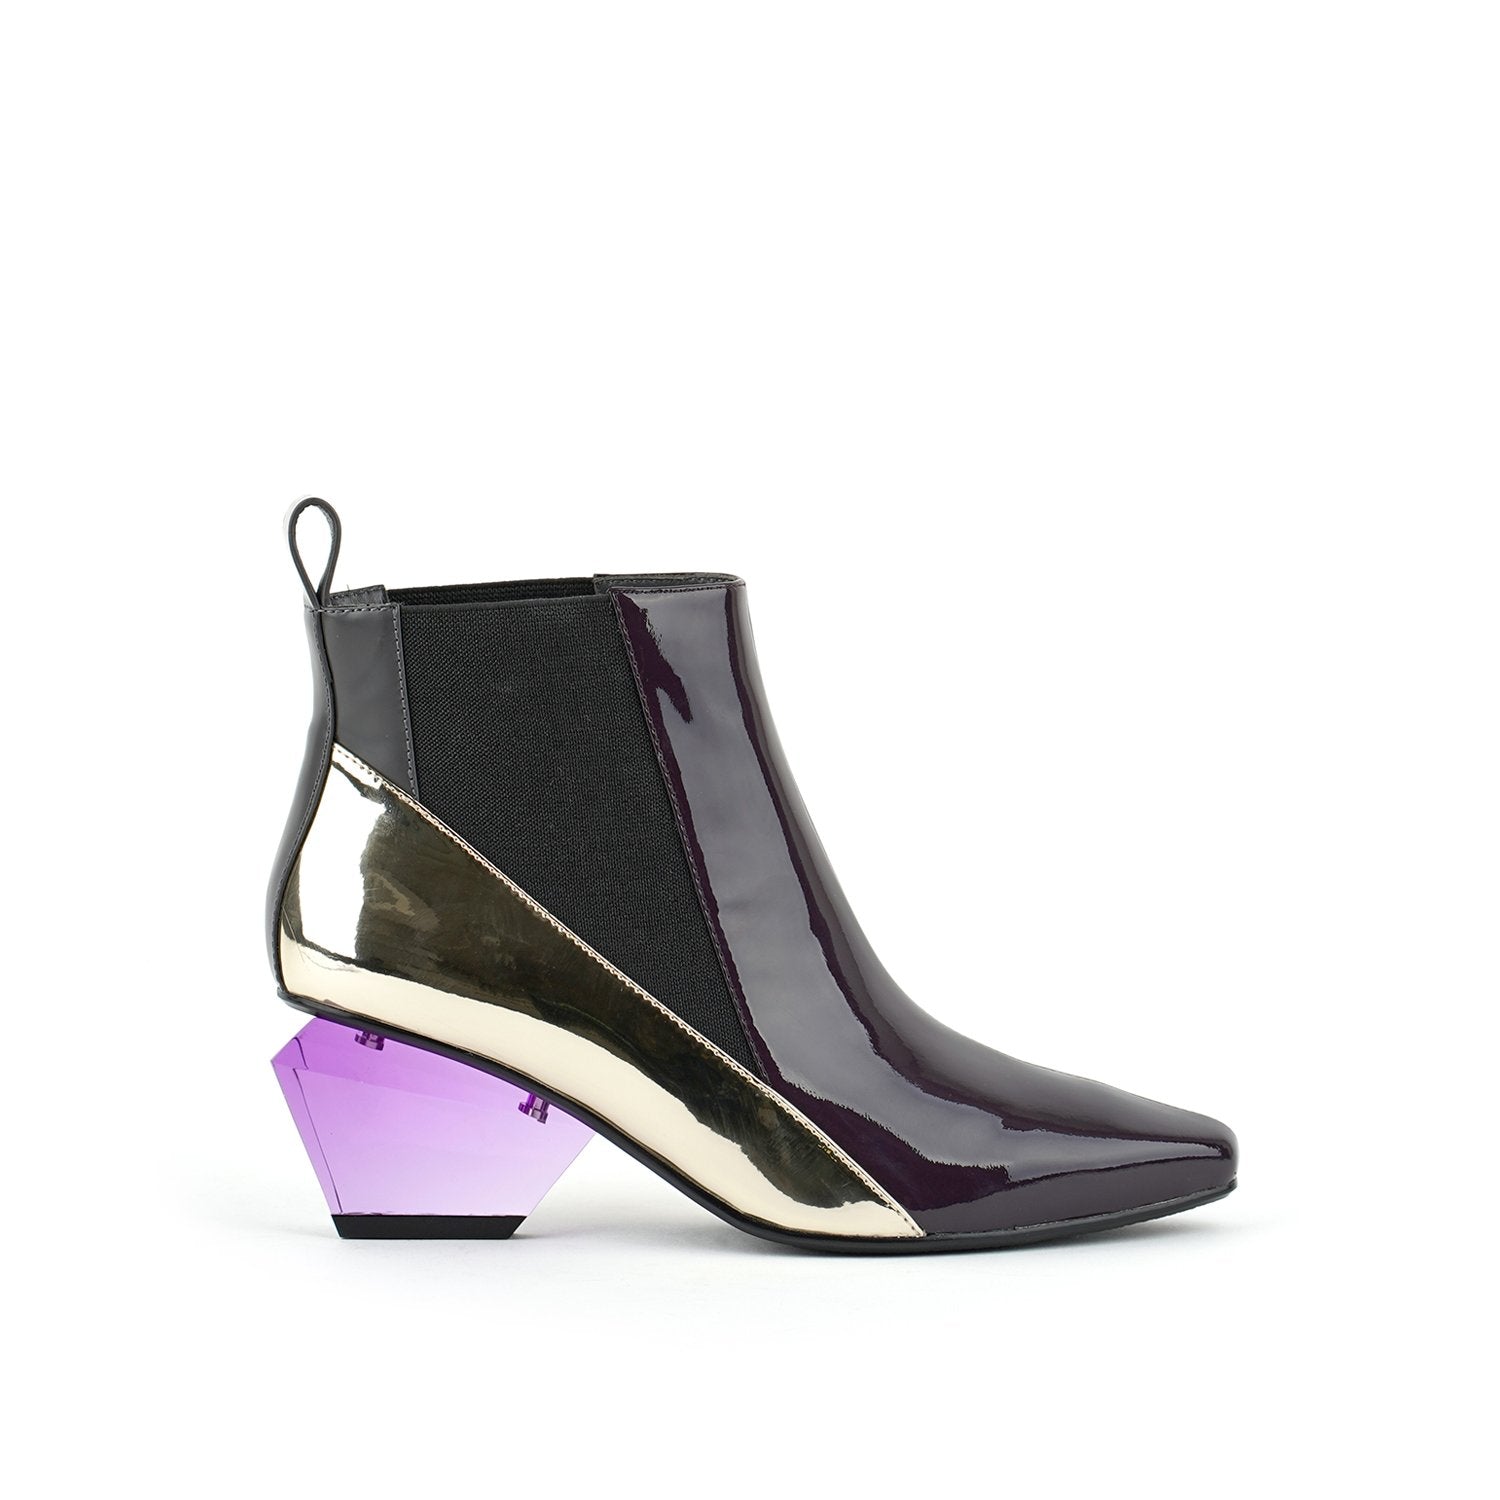 Outer side view of the united nude jacky h bootie. This bootie sits at the ankles. The top of the shoe is midnight brown. The bottom part of the shoe is silver. This bootie has elastic sides and a purple glass like heel.